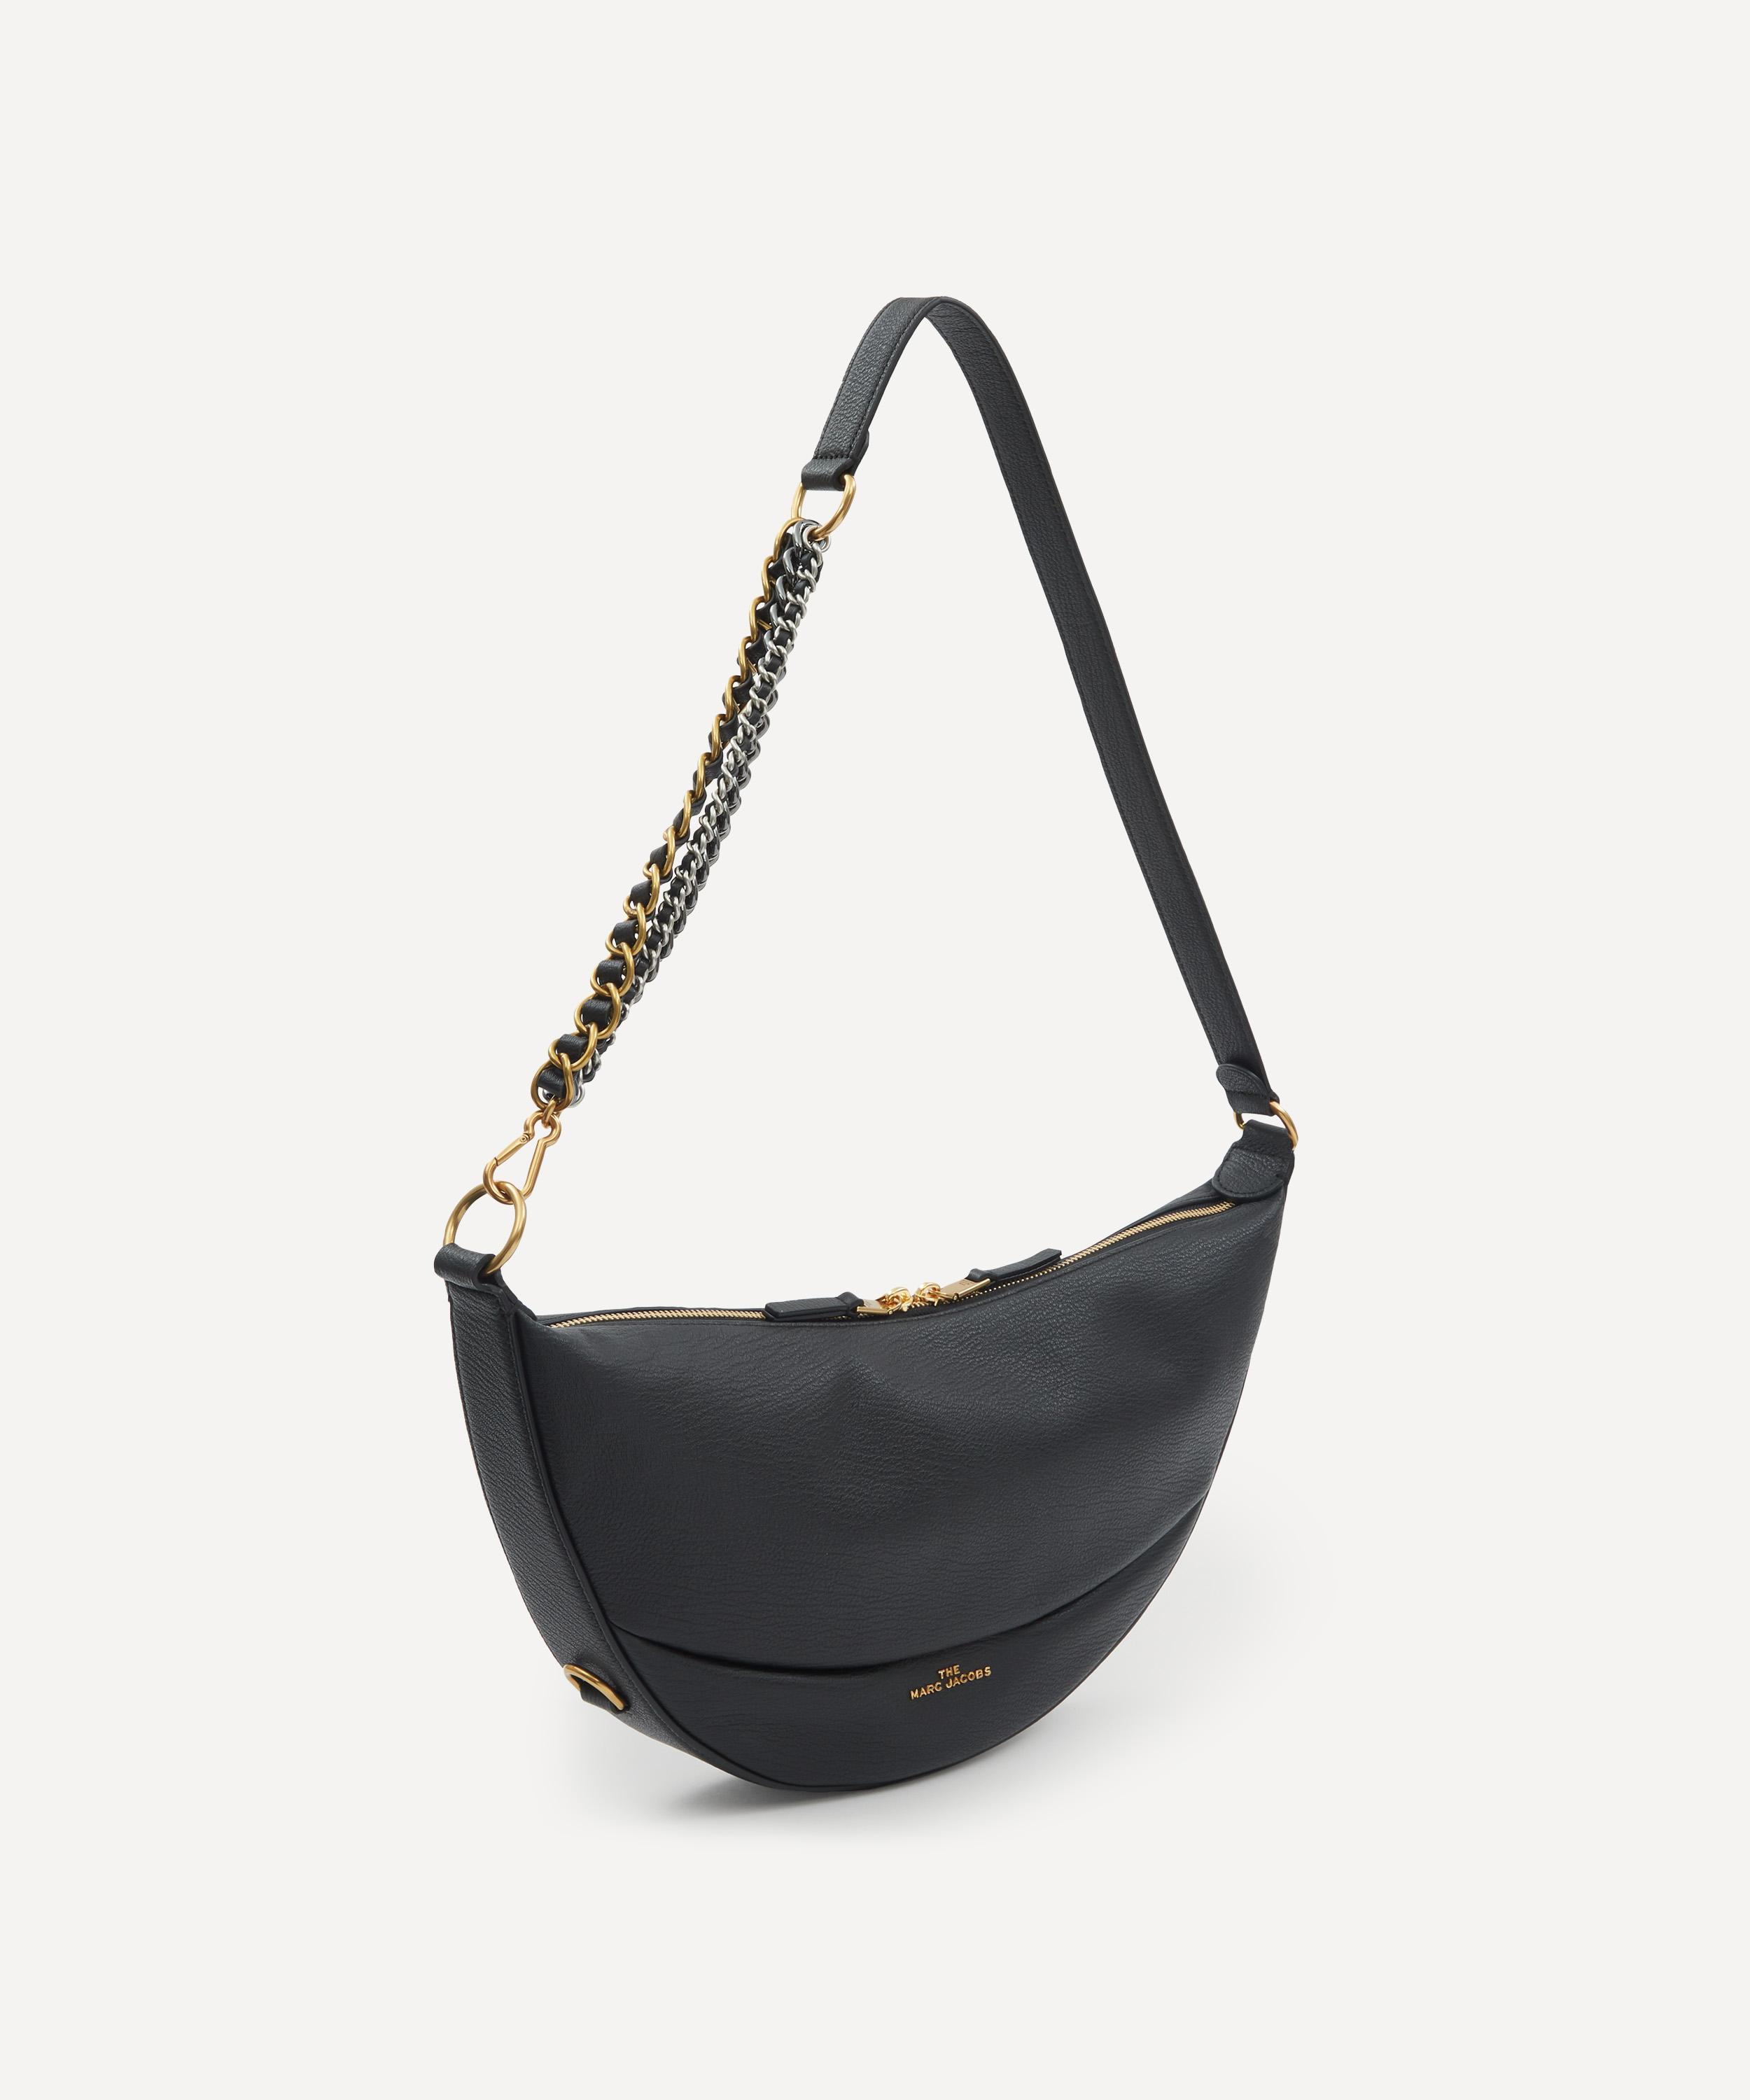 Marc Jacobs The Eclipse Leather Cross-body Bag in Black - Lyst